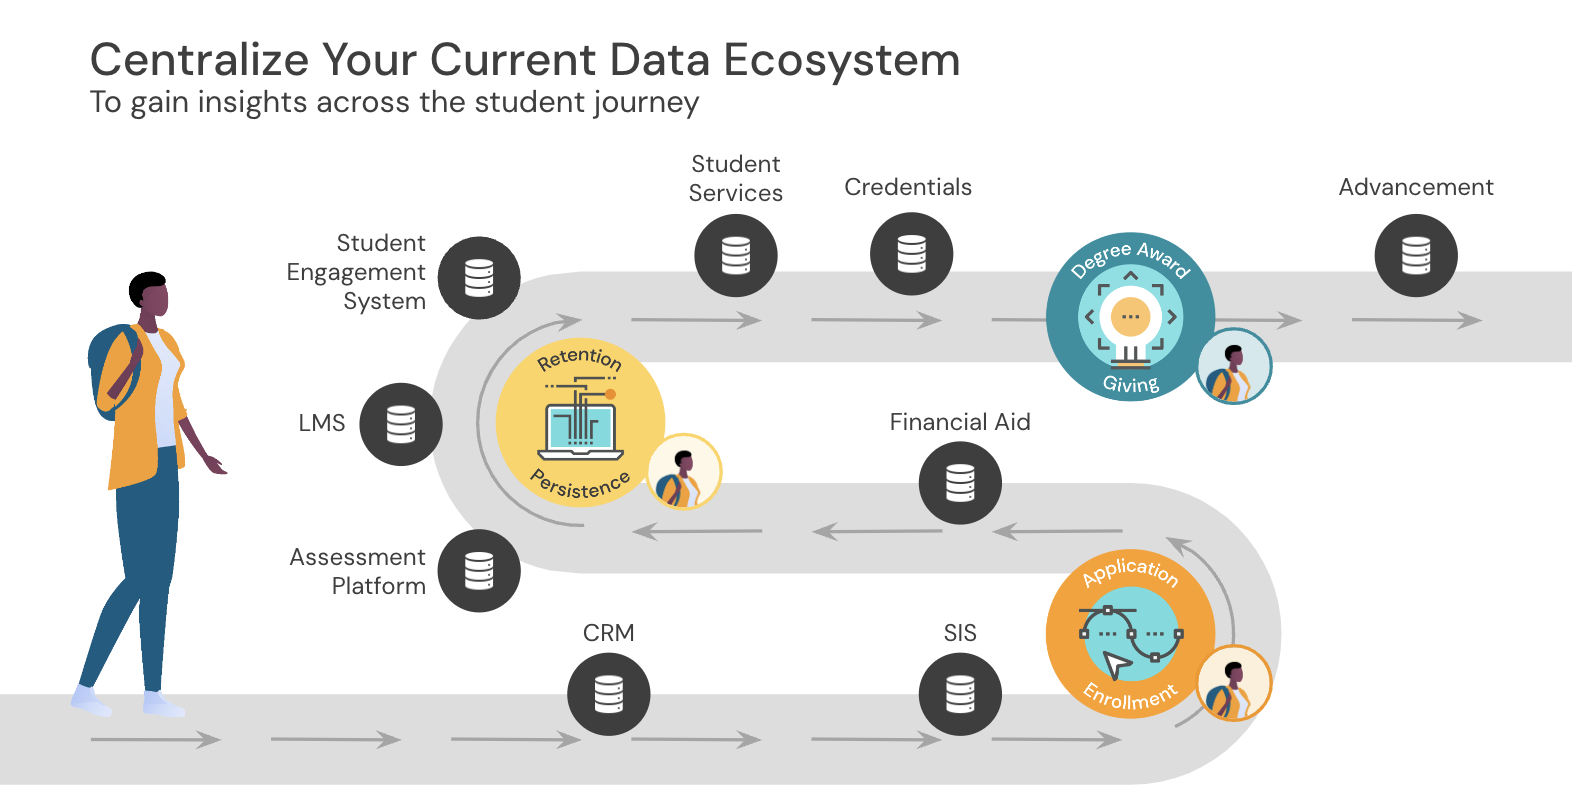 An infographic illustrating how to centralize your current data ecosystem.